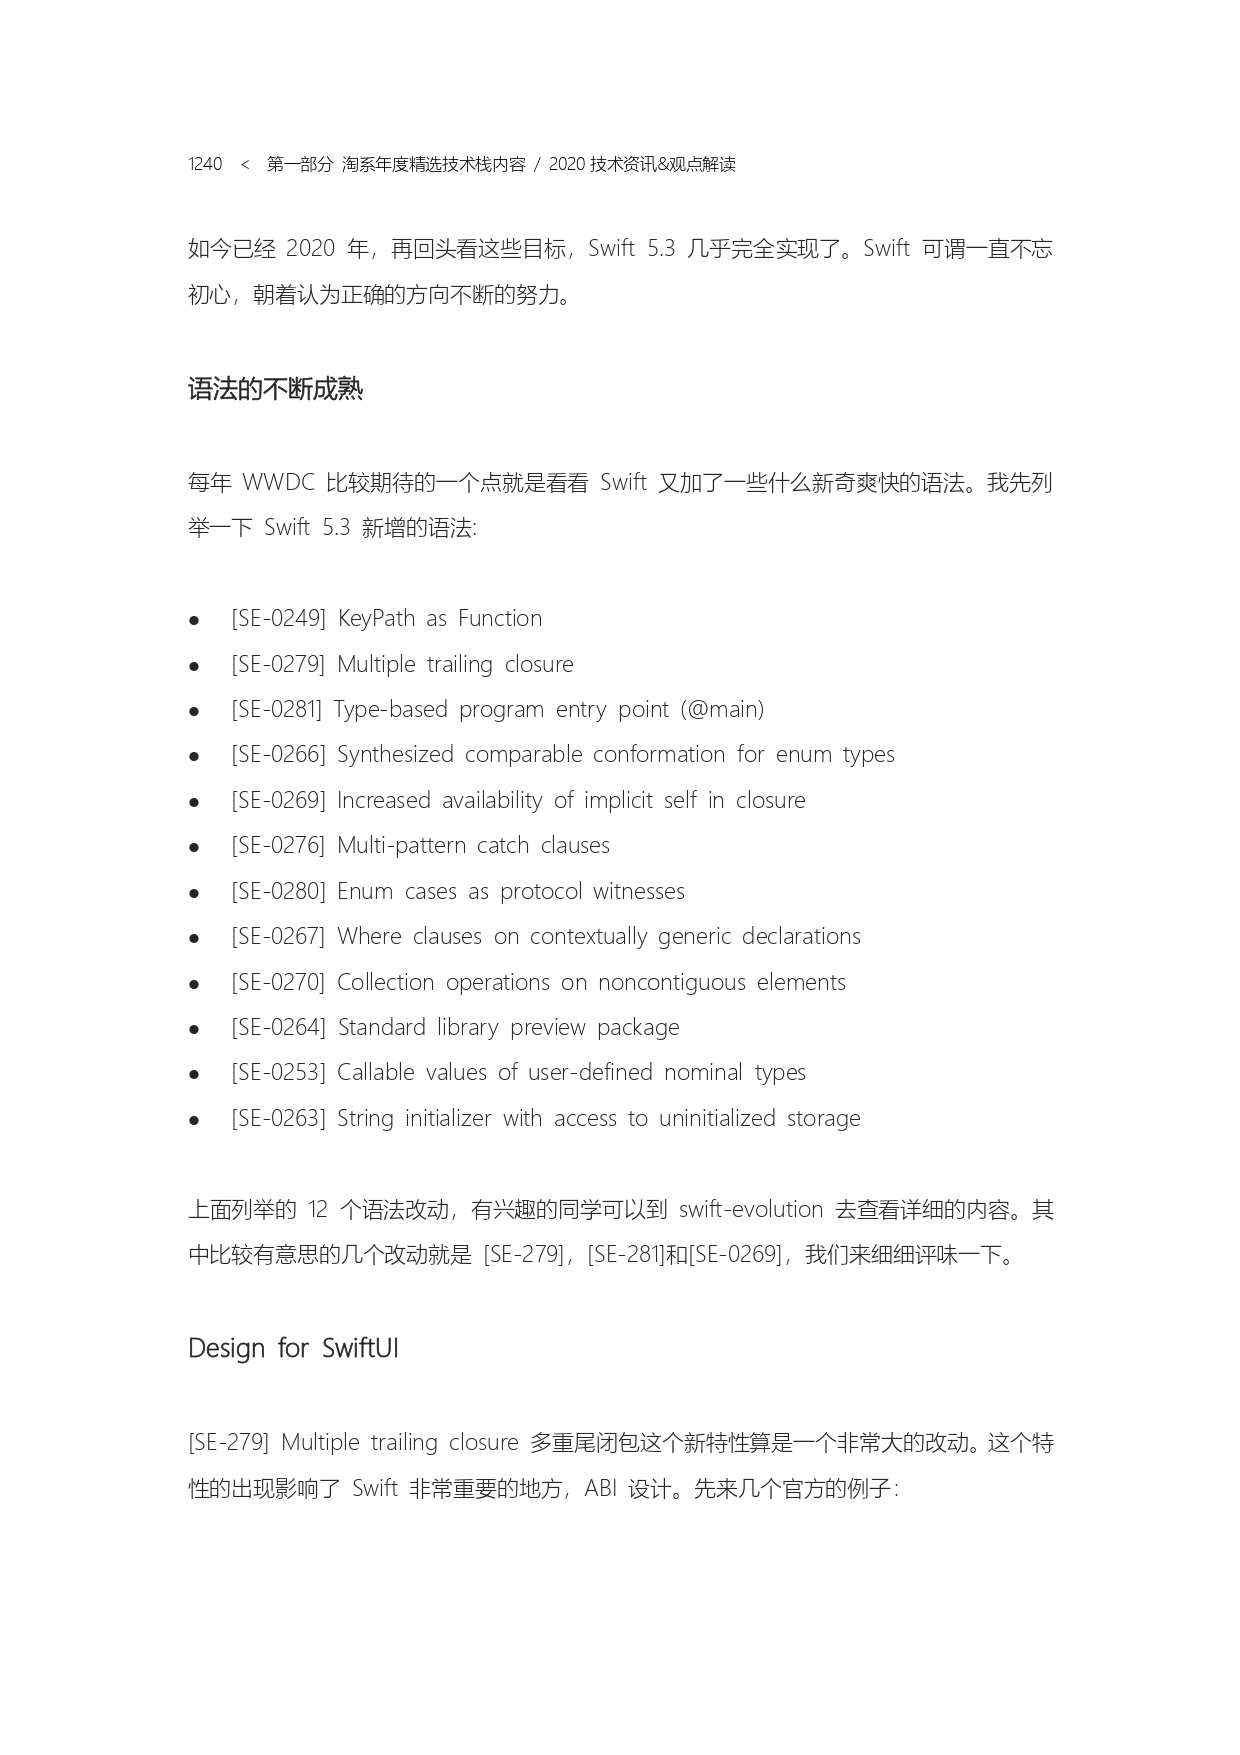 The Complete Works of Tao Technology 2020-1239-1312_page-0002.jpg